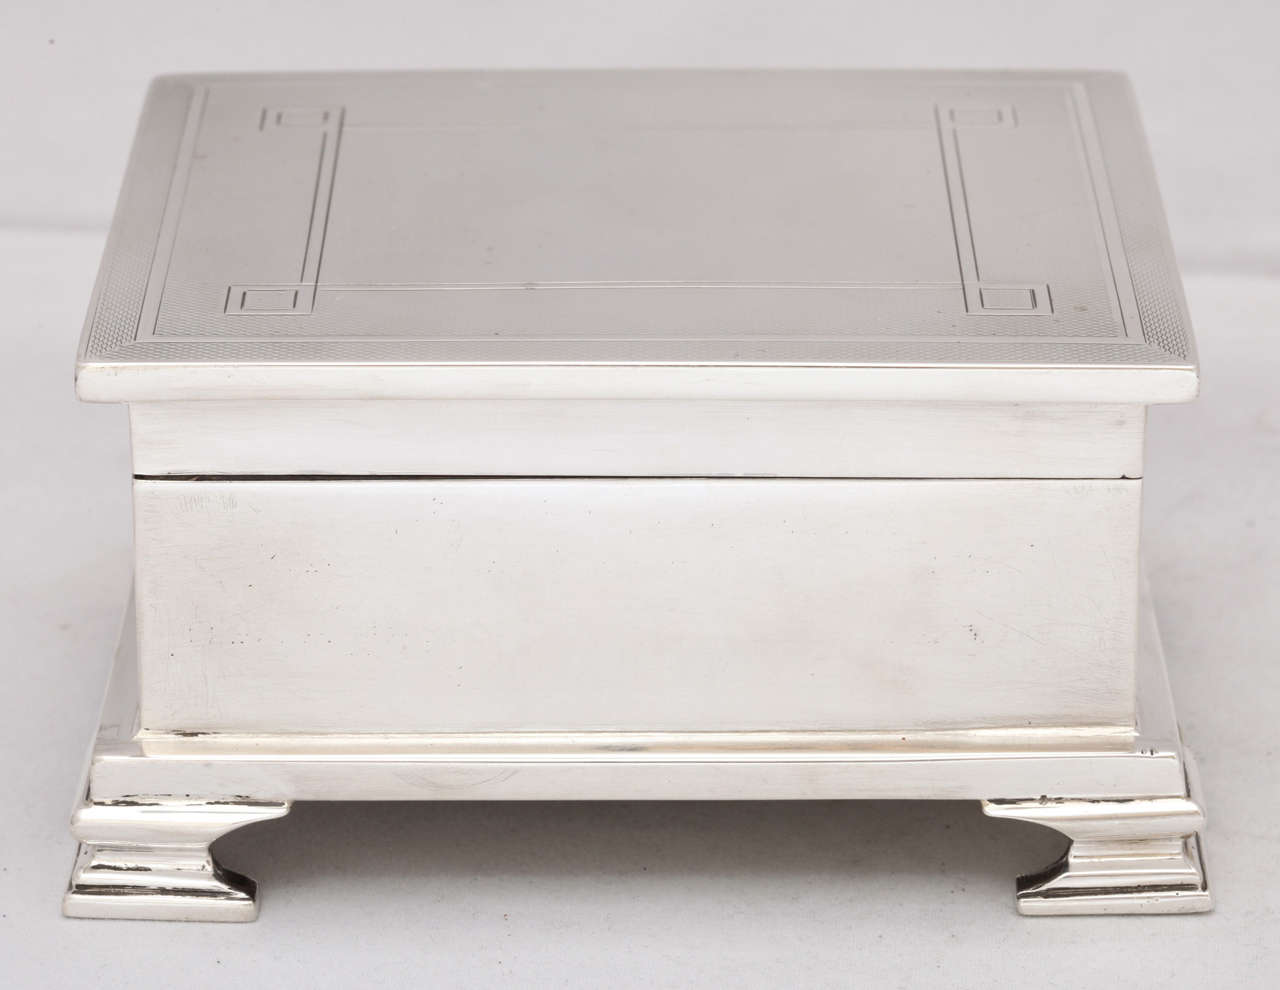 Beautiful, Art Deco, sterling silver, footed table box with hinged lid, Birmingham, England, 1934, Aaron Lufkin Dennison - maker. Lovely, Art Deco, engine turned design. @4 1/2